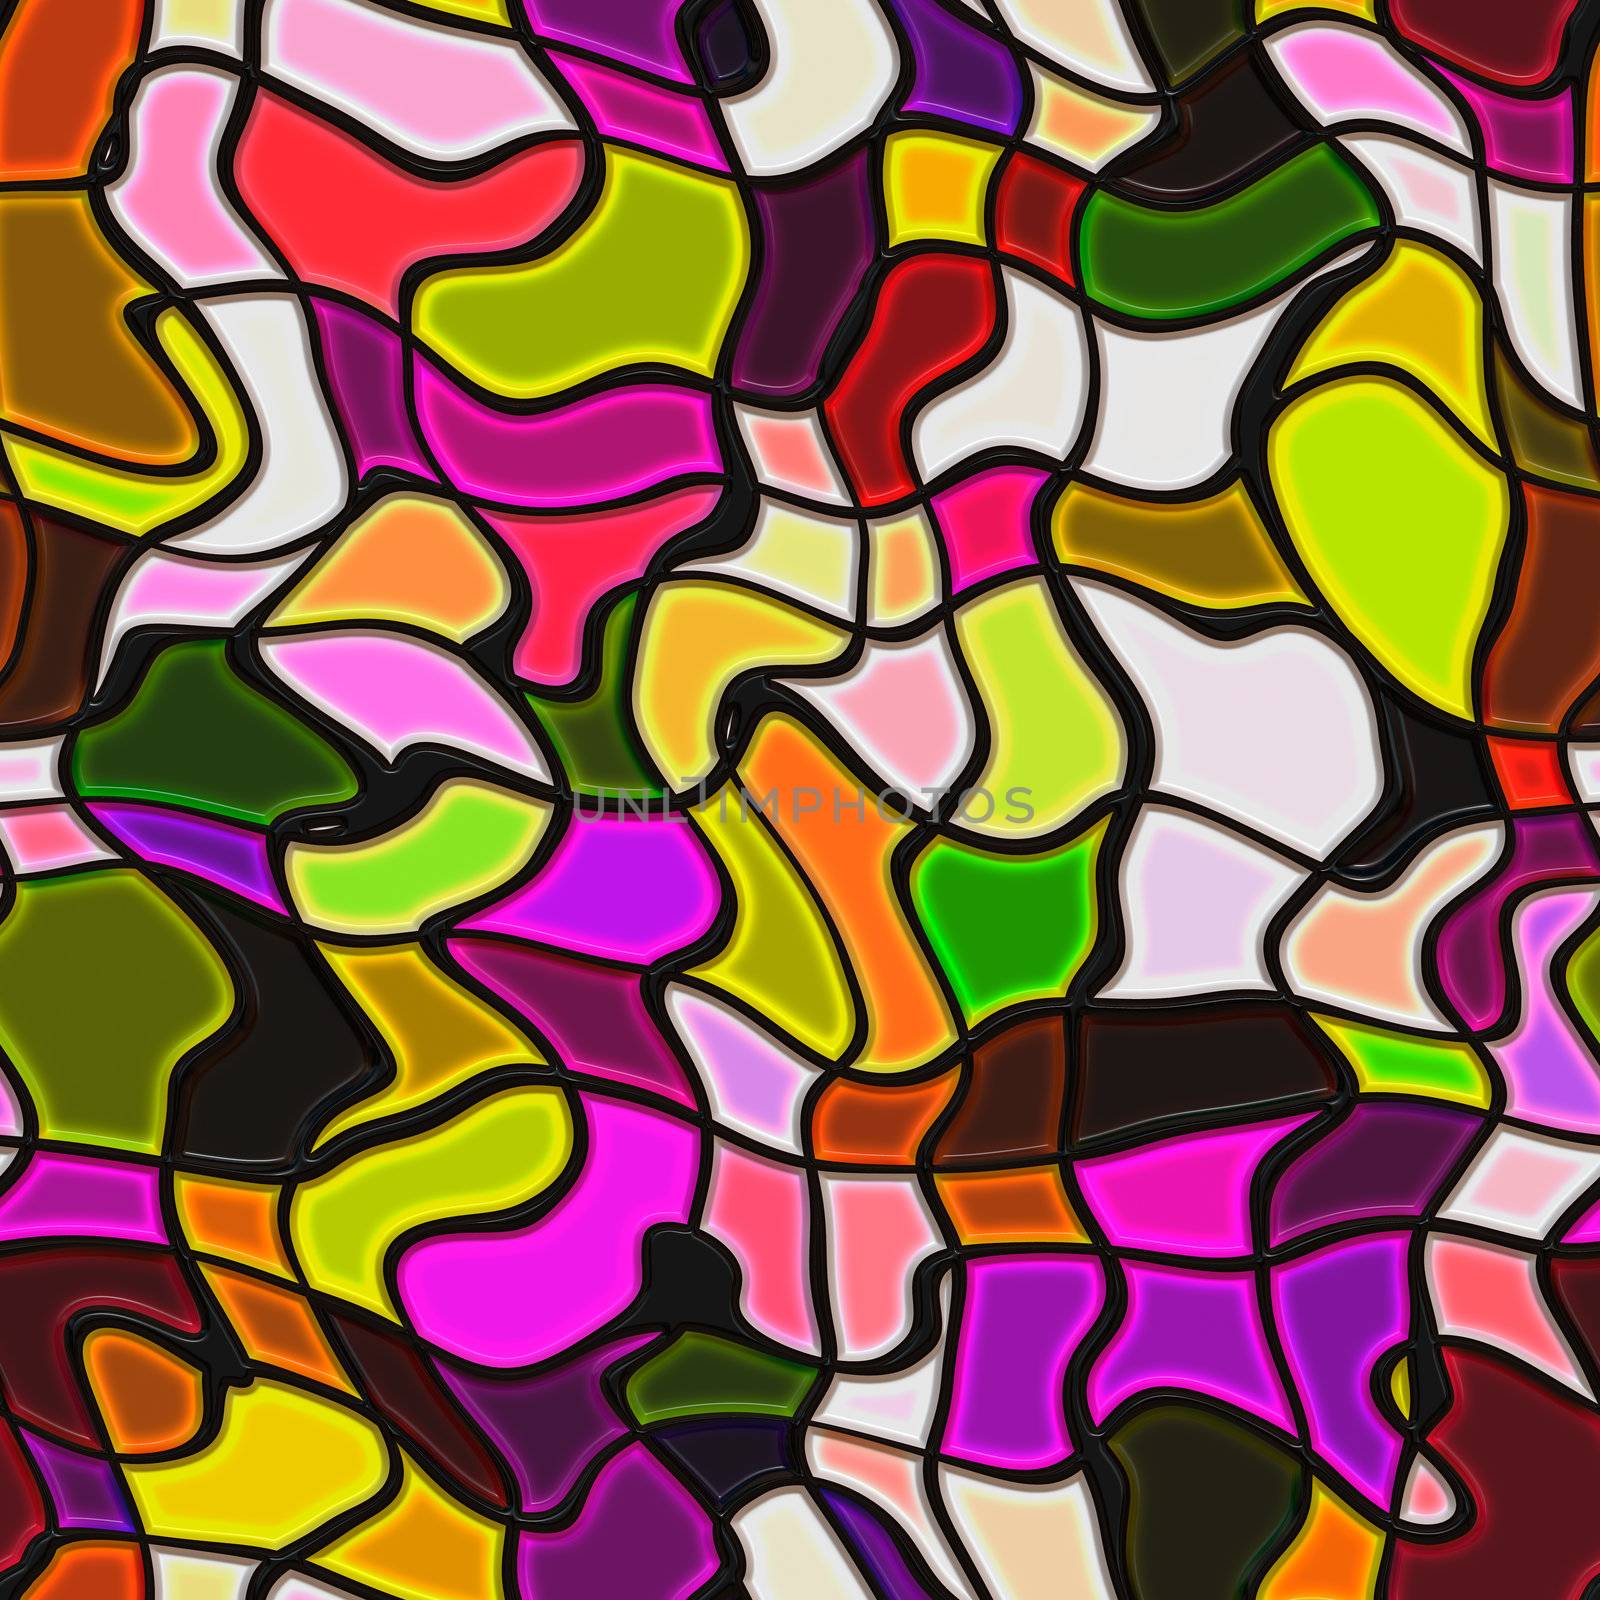 High quality seamless stained glass background